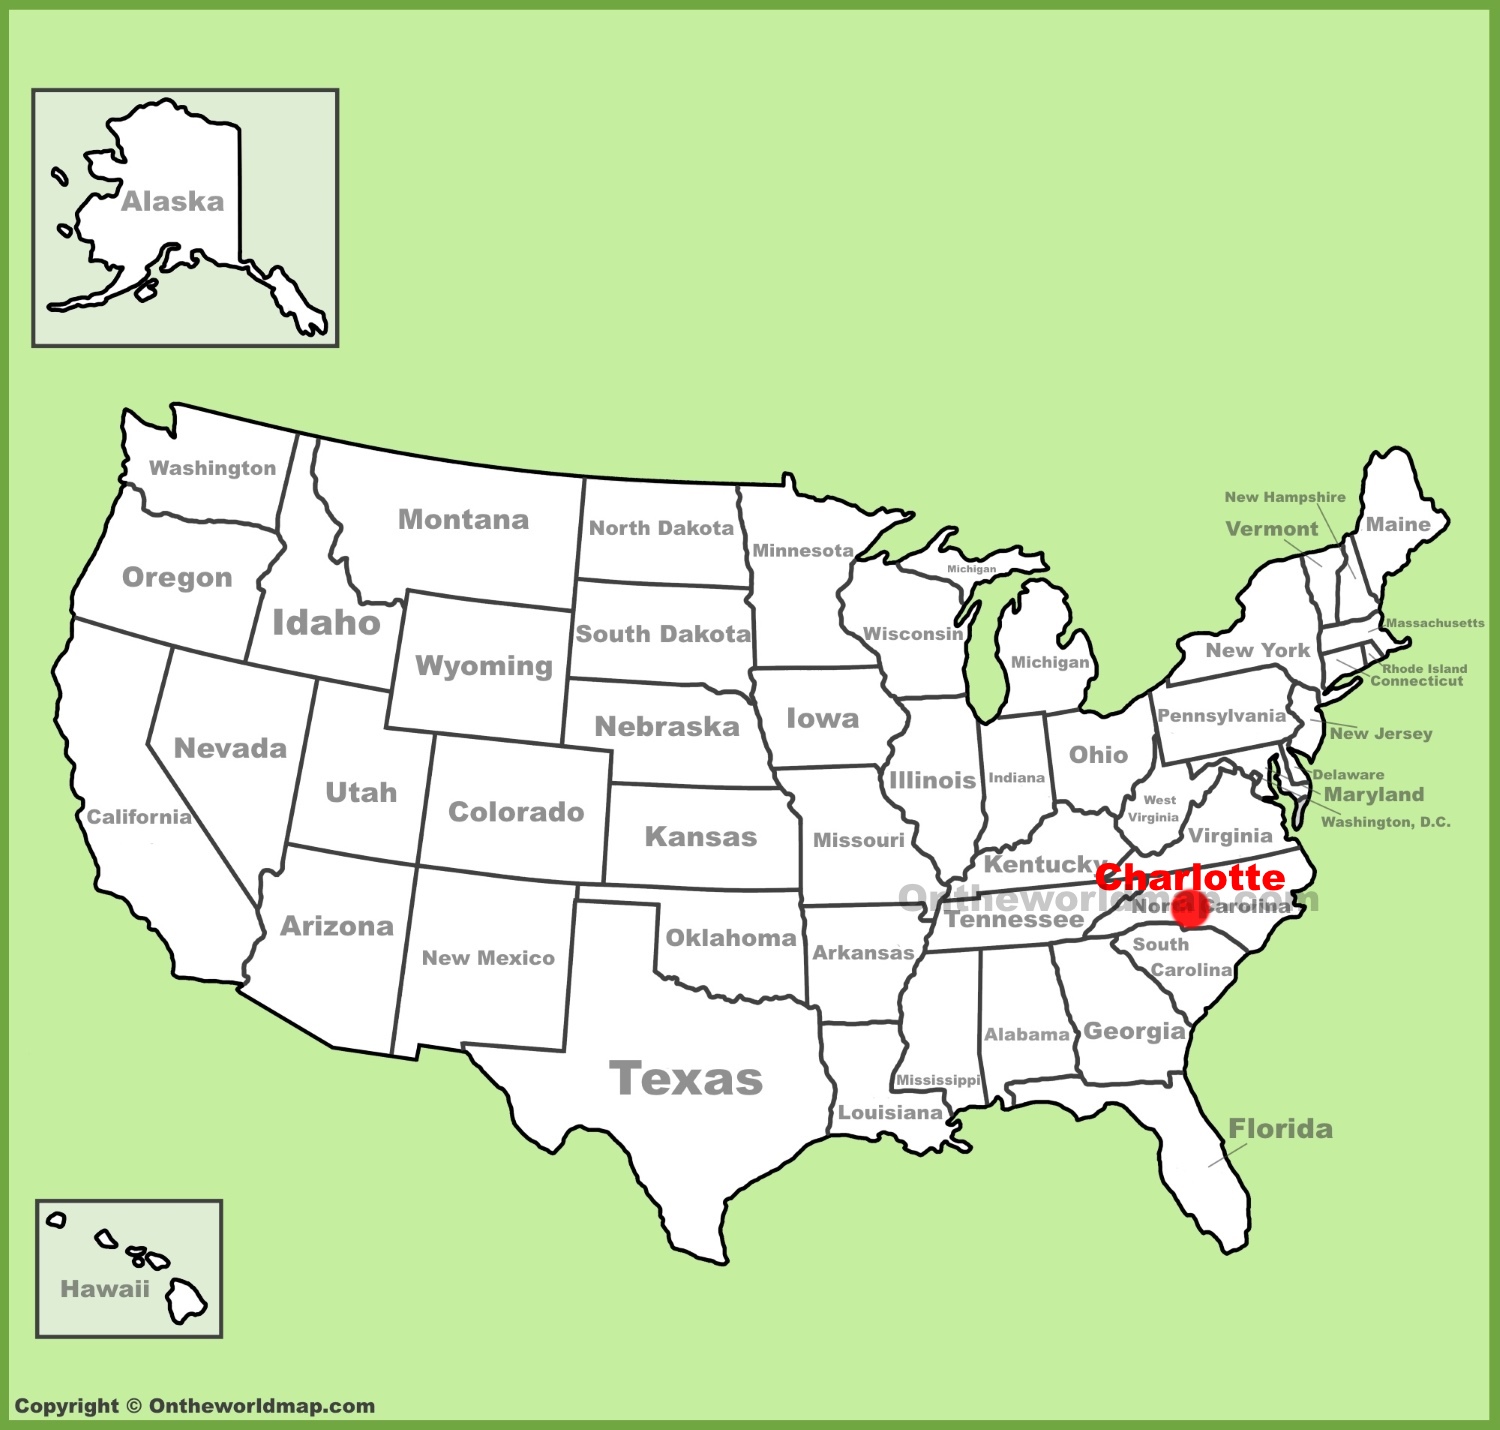 Charlotte location on the U.S. Map